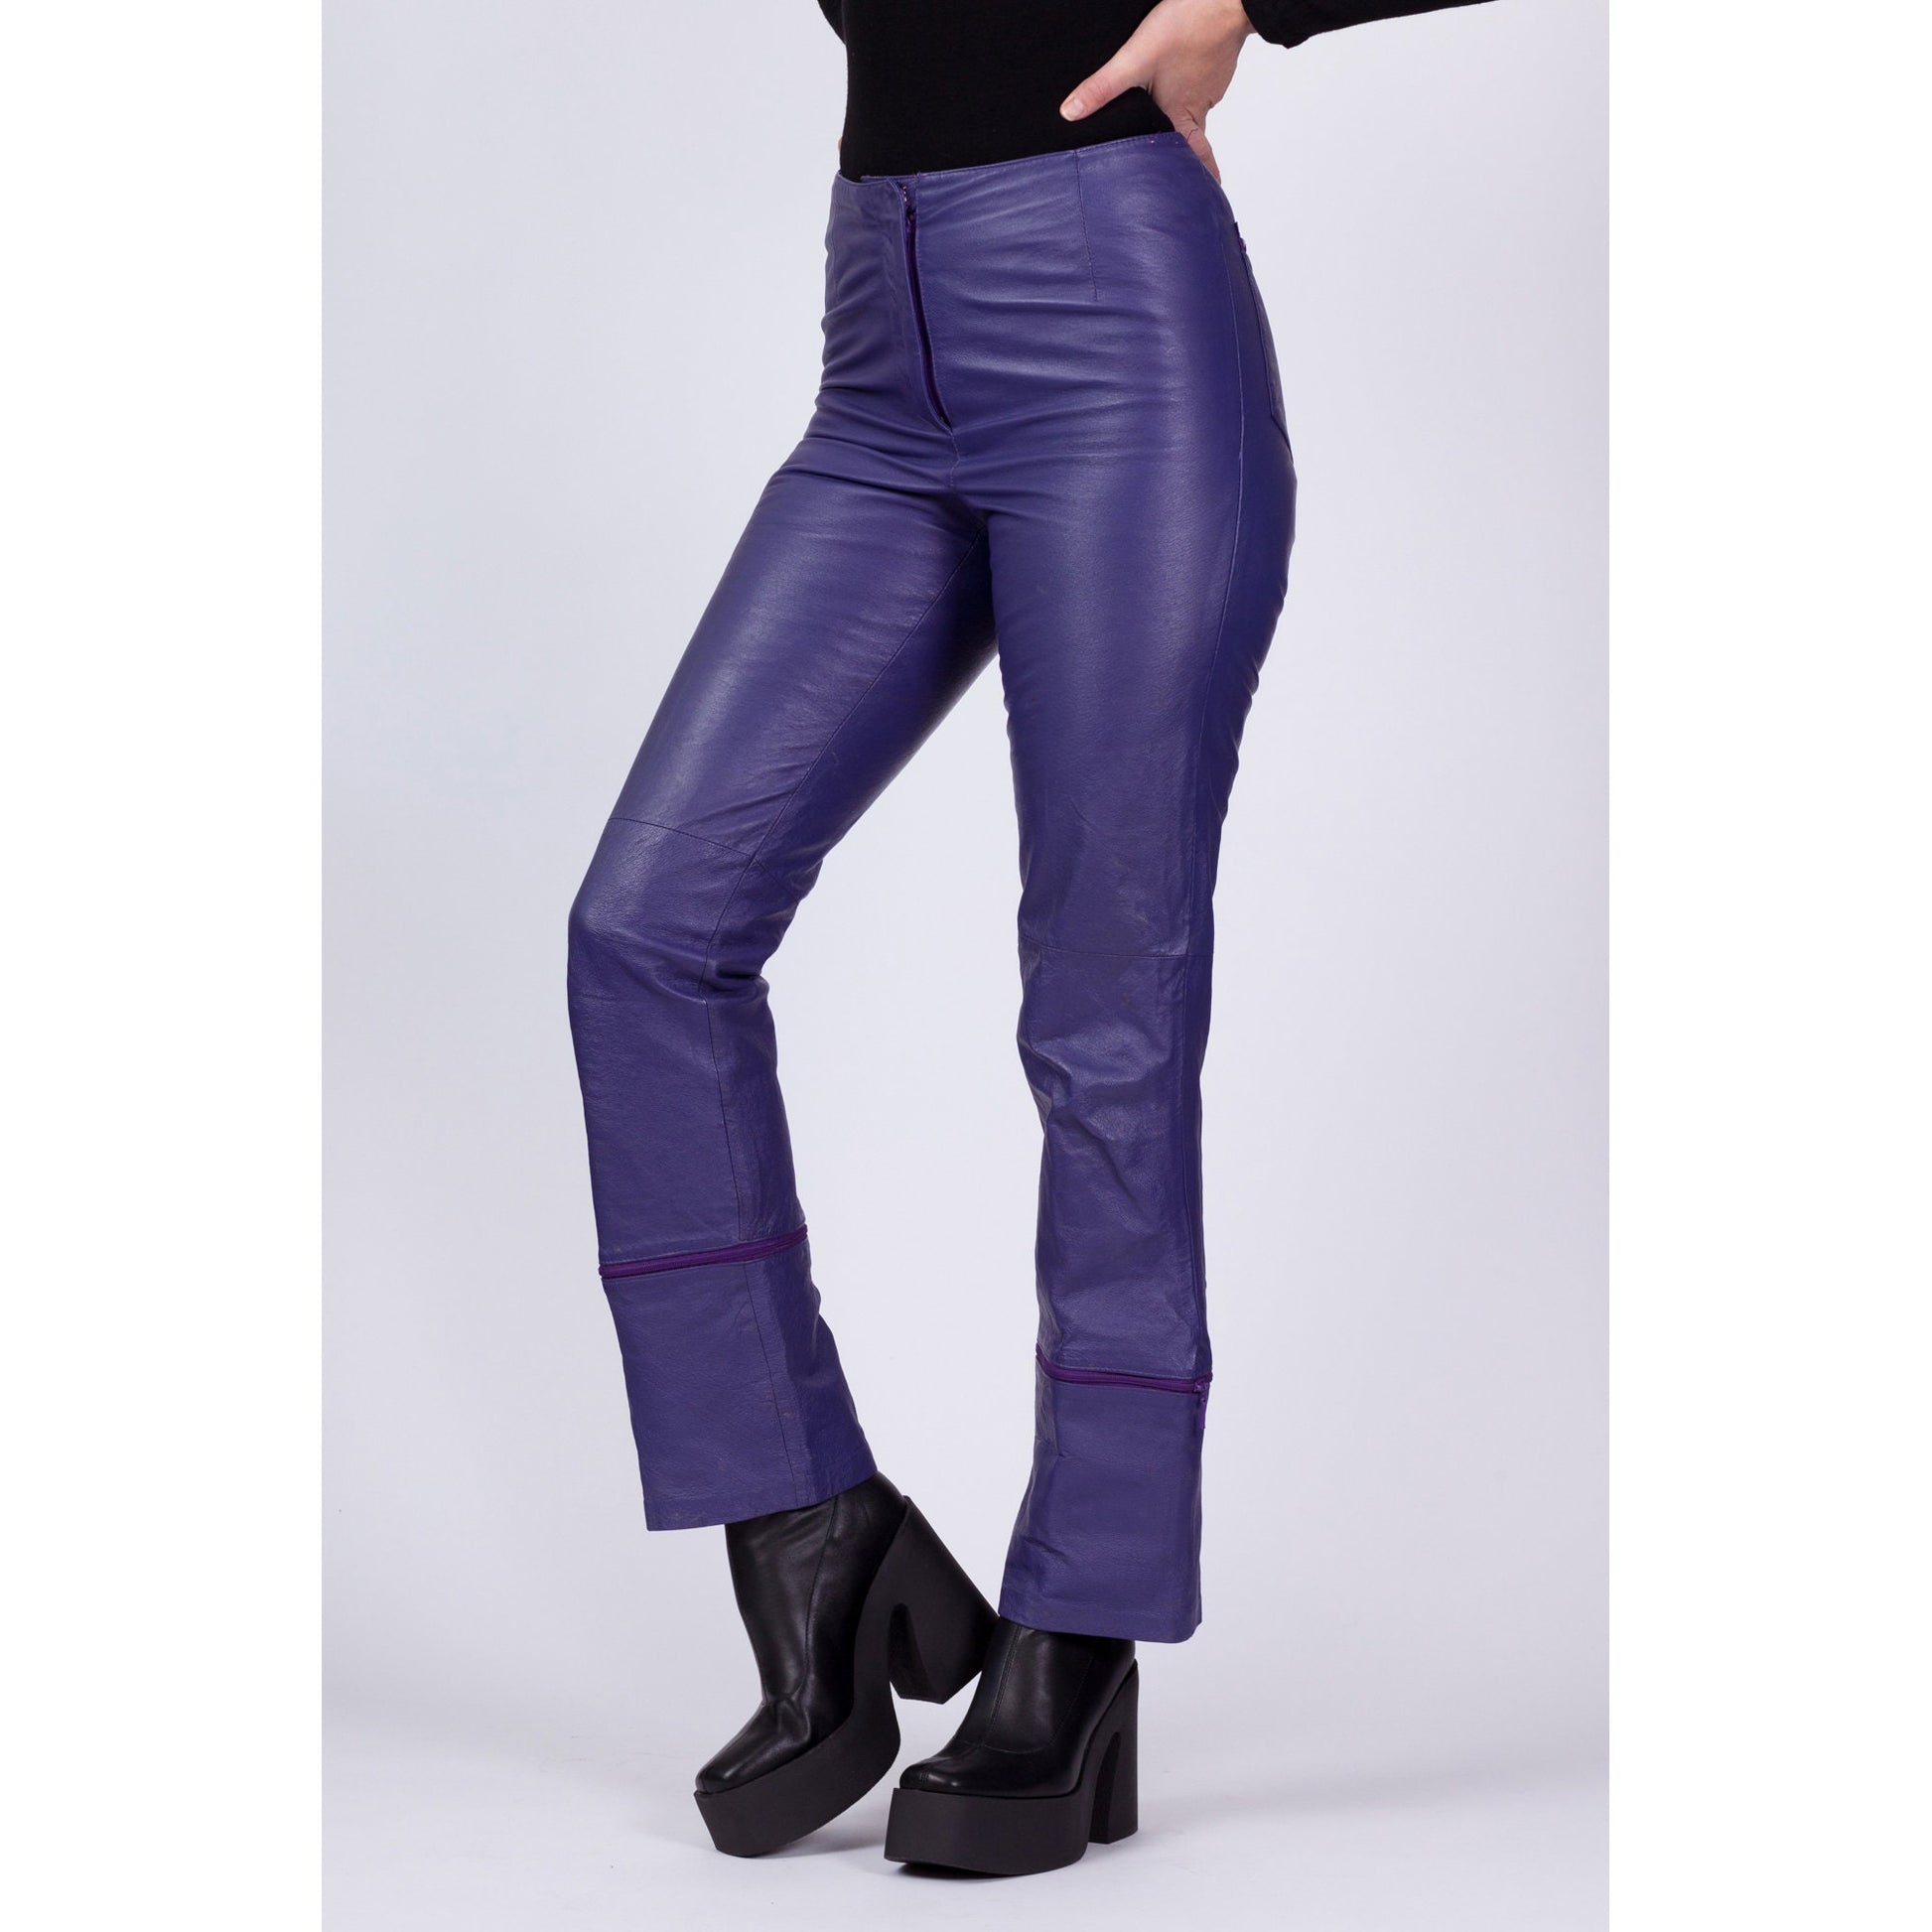 90s Purple Leather Zip-Off Pants - Small 